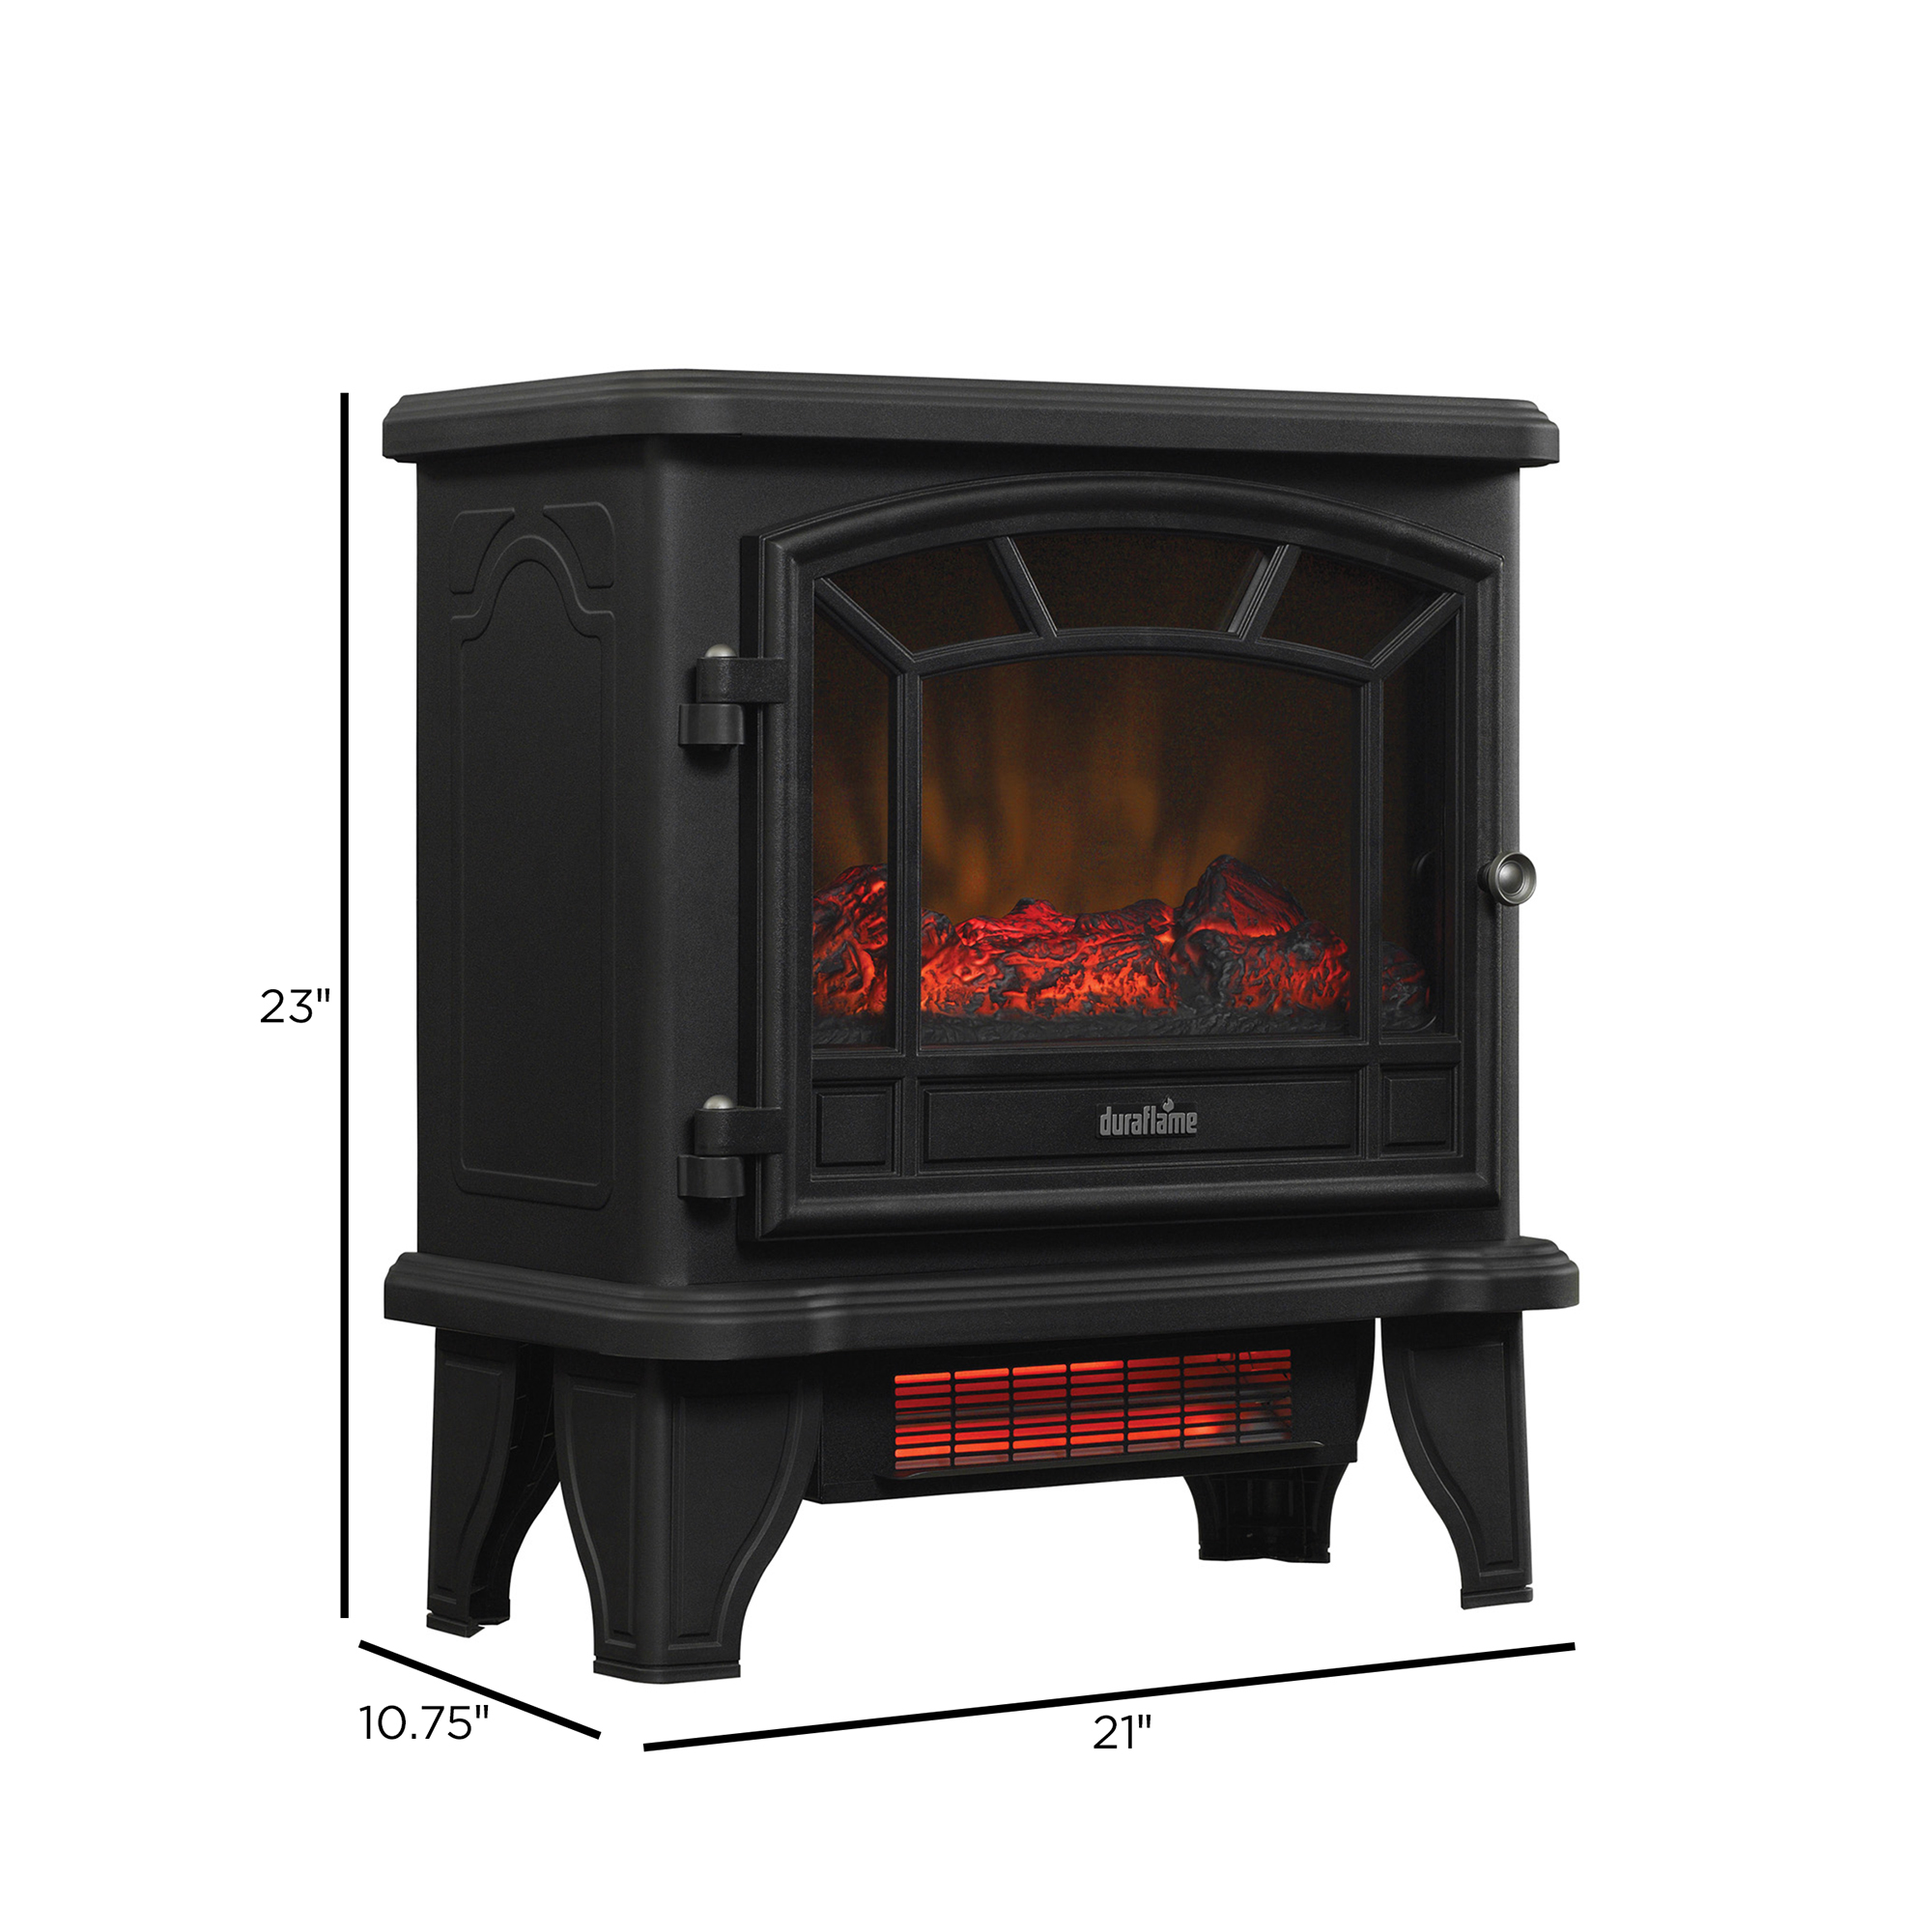 Duraflame 1,000 sq ft Infrared Quartz Electric Fireplace Stove Heater - image 4 of 5